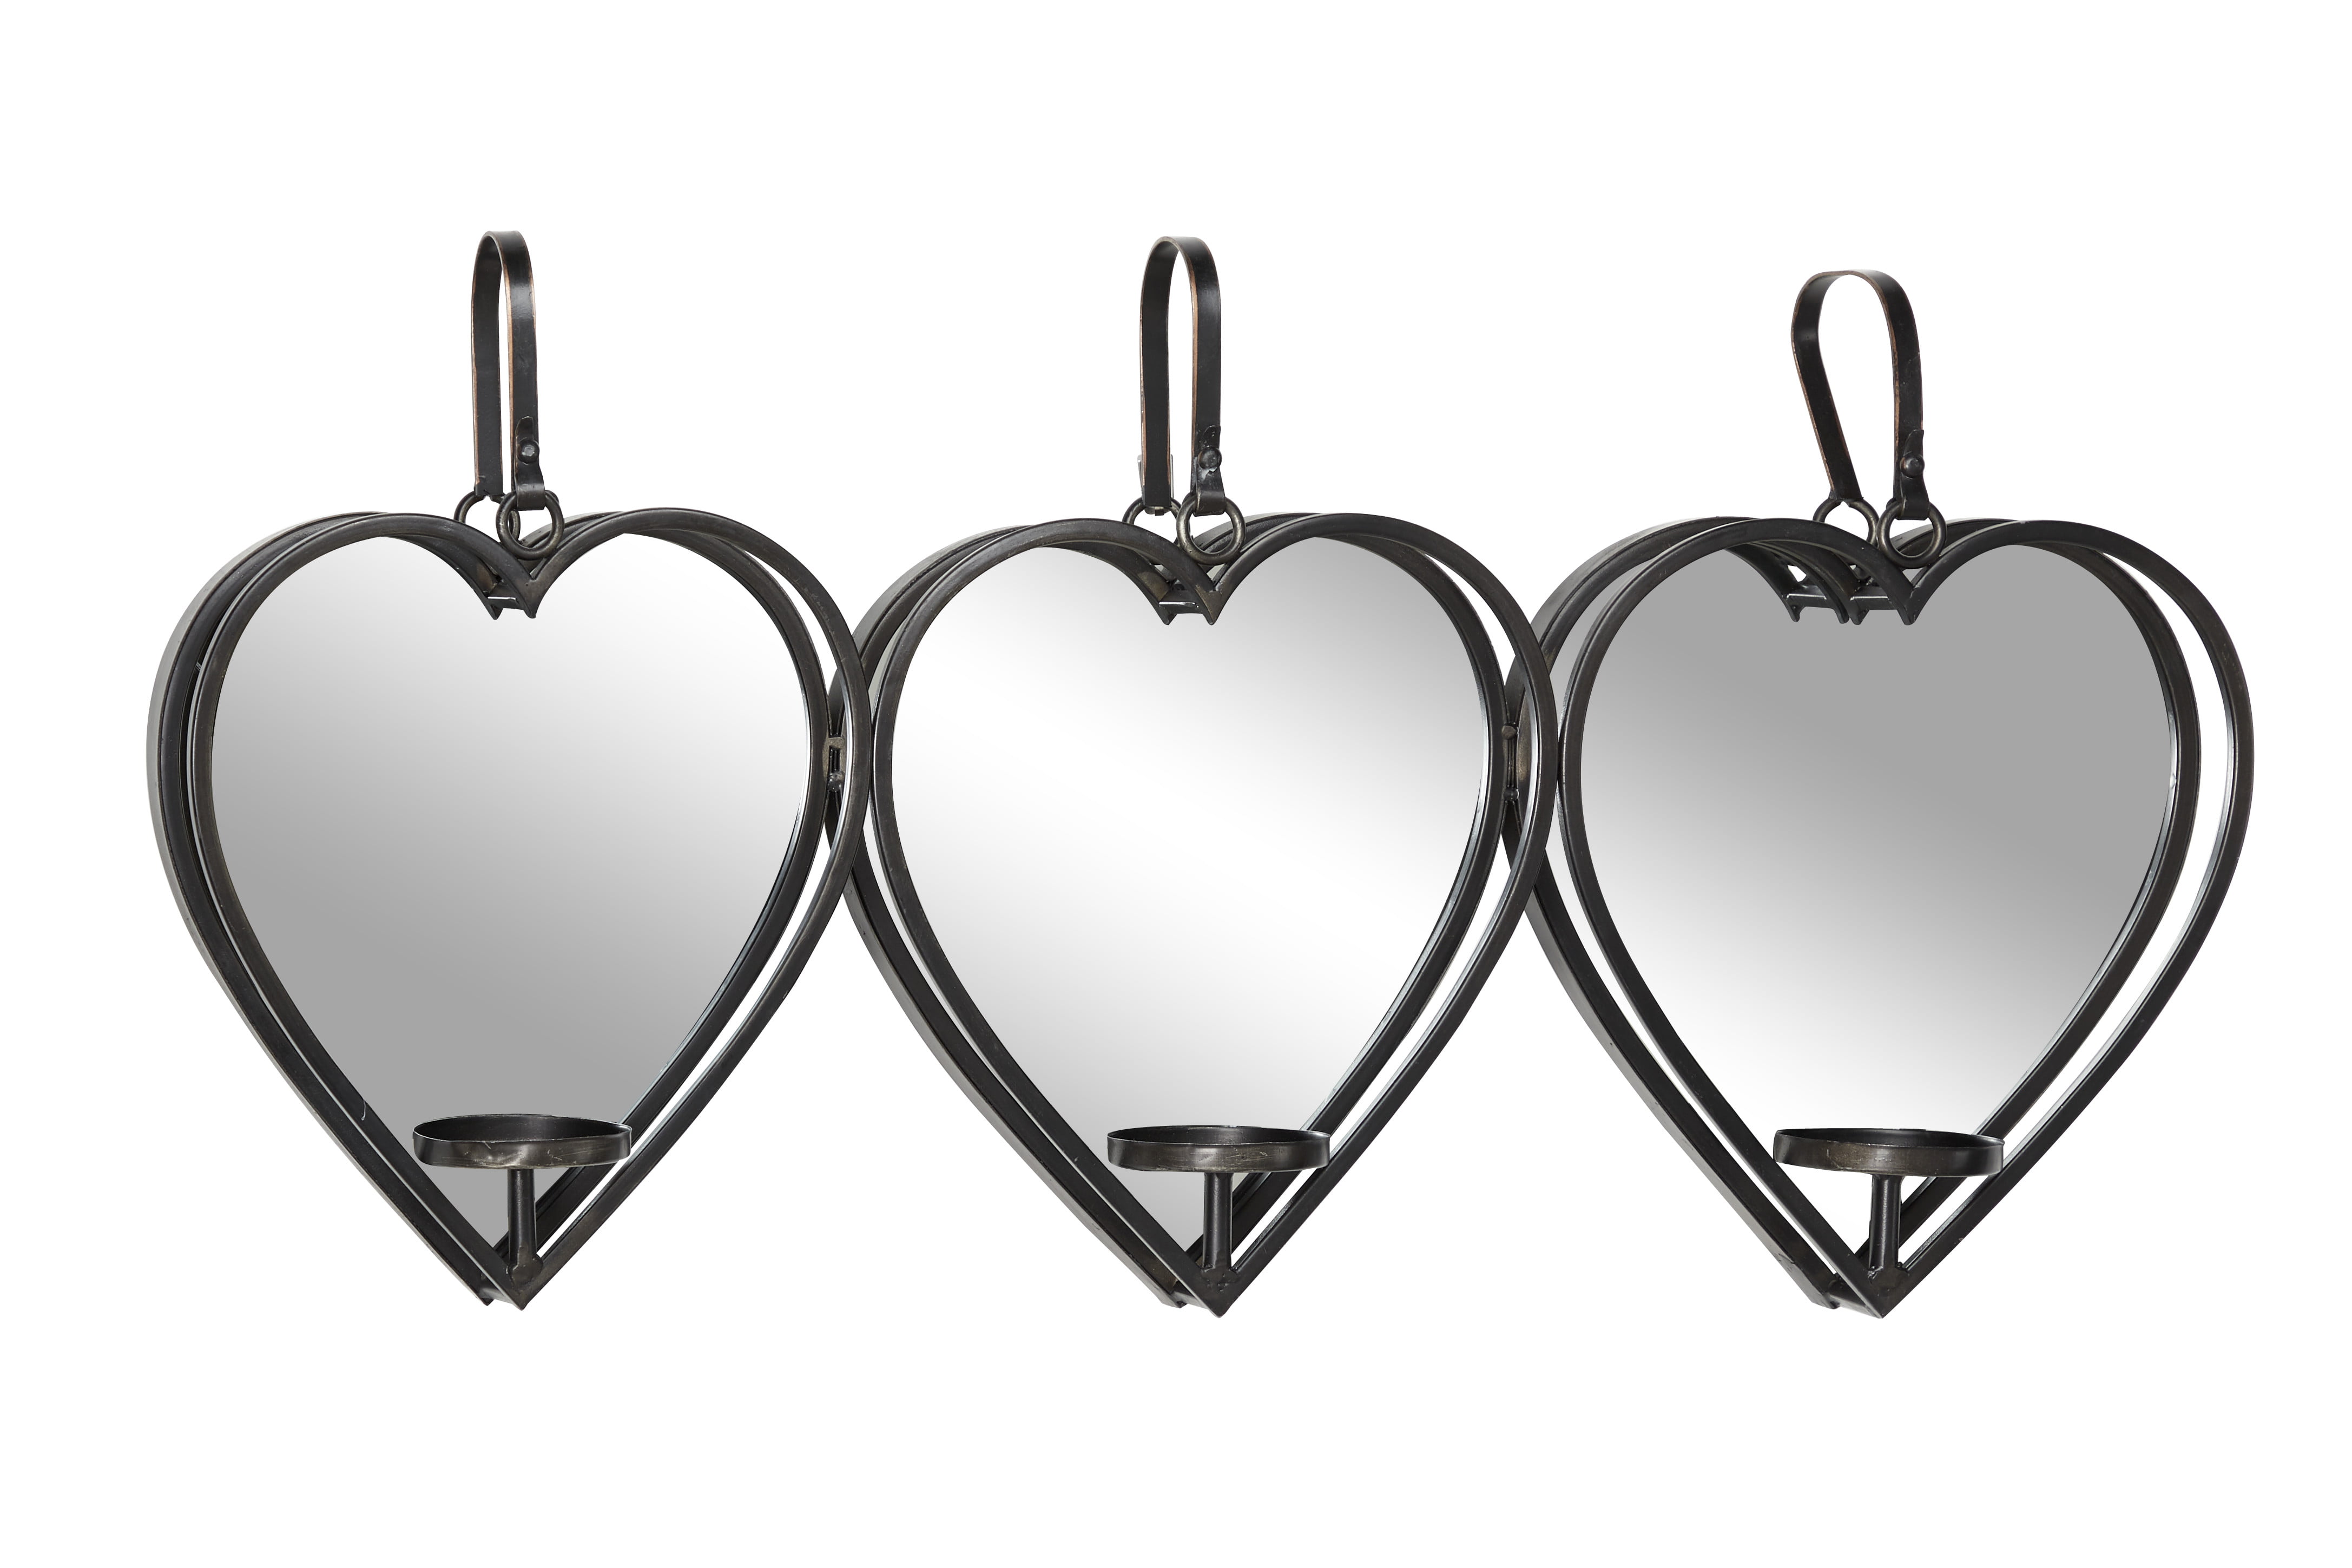 A BRAND NEW ANTIQUELOOK CANDLE HOLDER HEART SHAPE MIRROR WALL HANGING IRON CROWN 